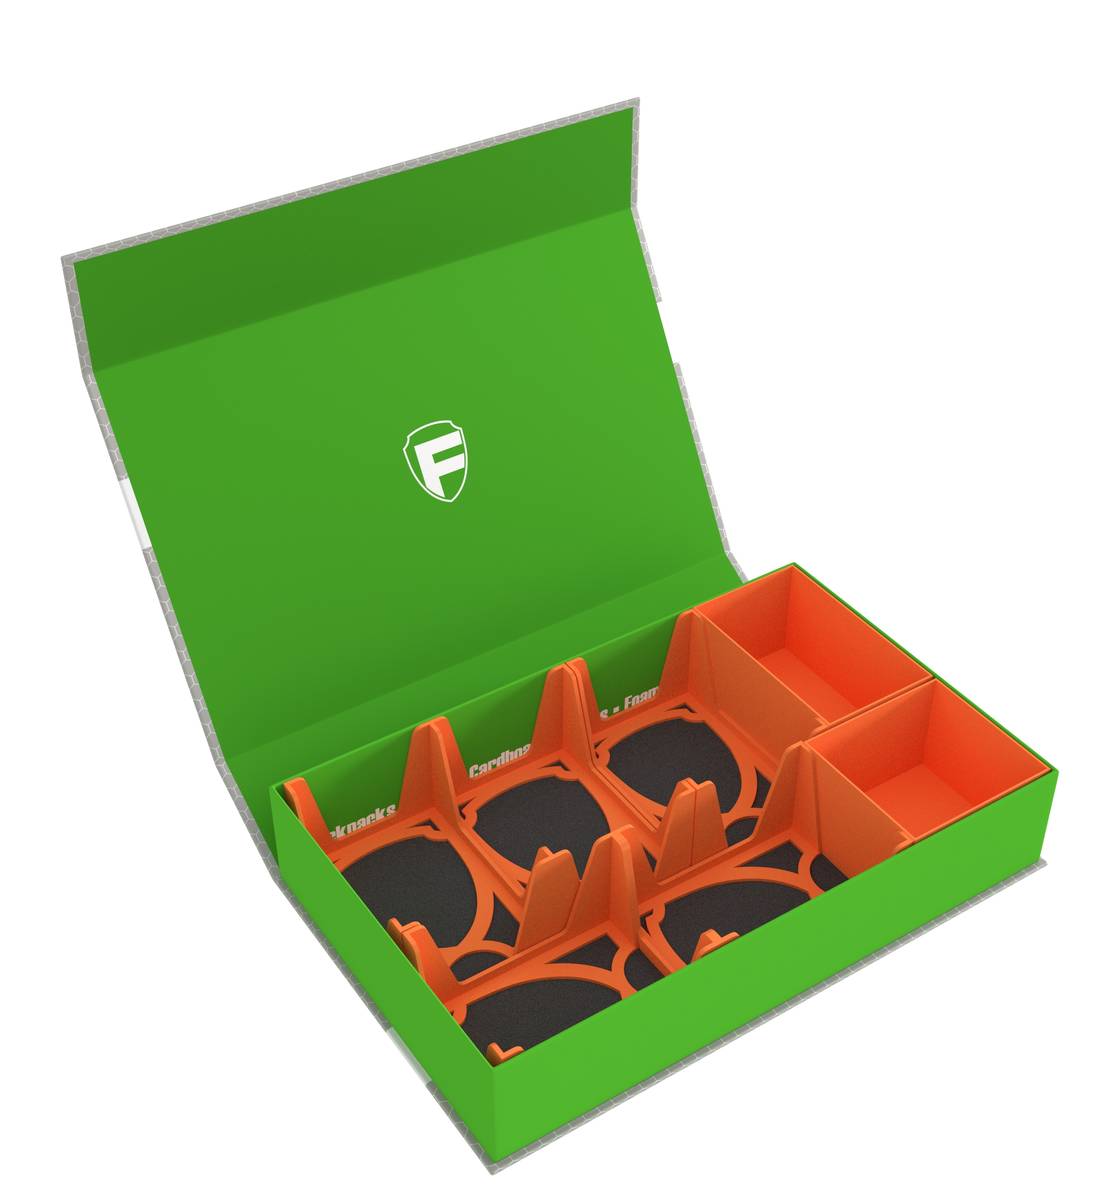 Feldherr Magnetic Box green for cards and game material - 750